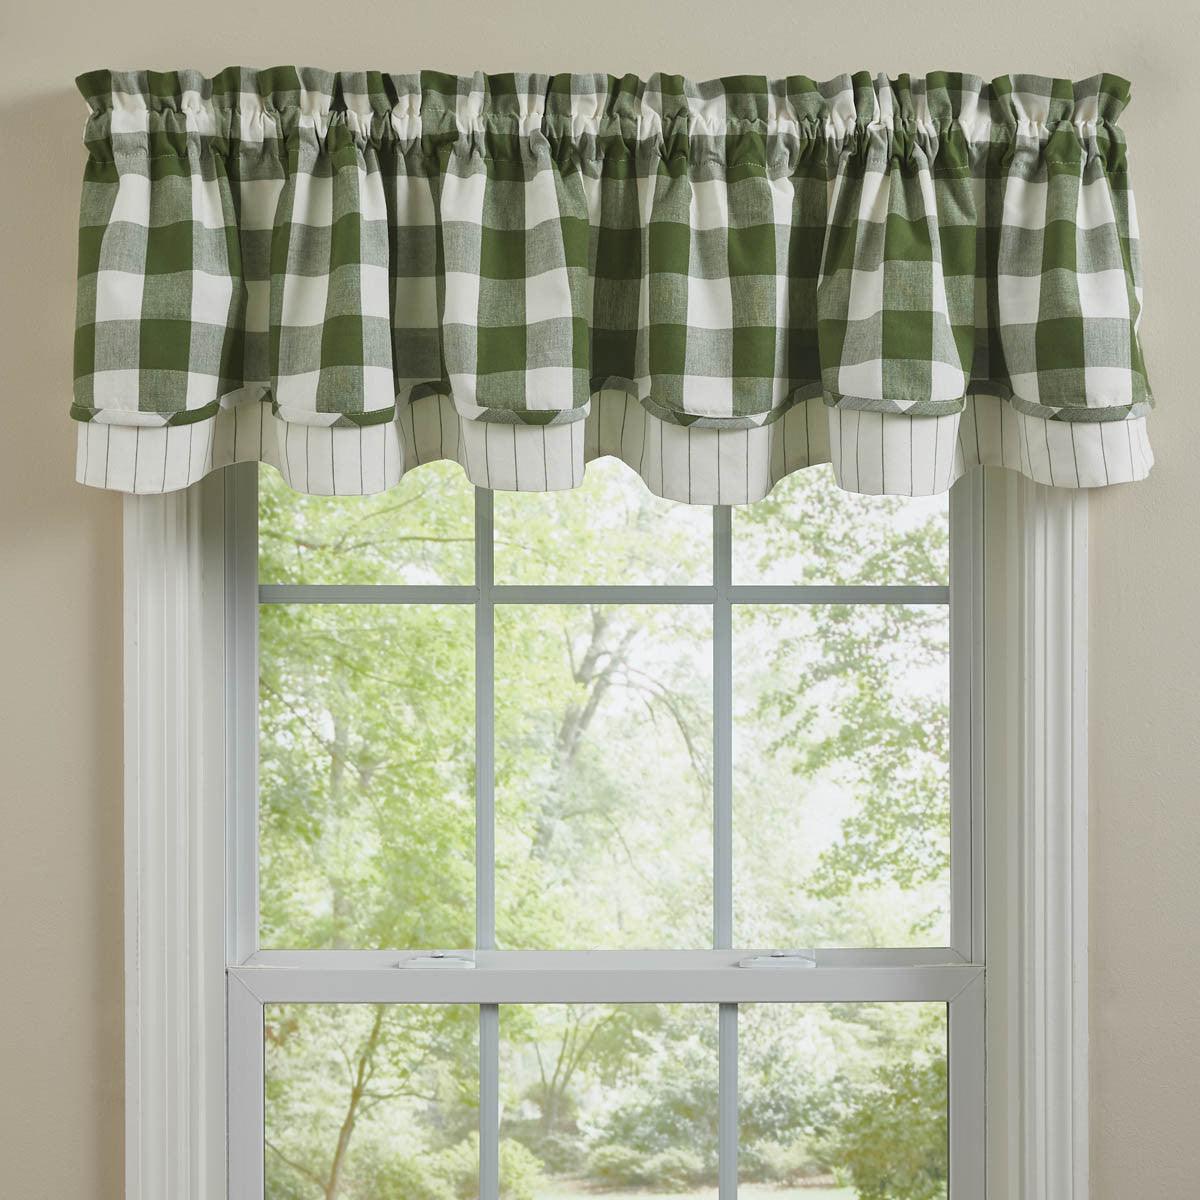 Wicklow Check Valance - Lined Layered Sage Park Designs - The Fox Decor